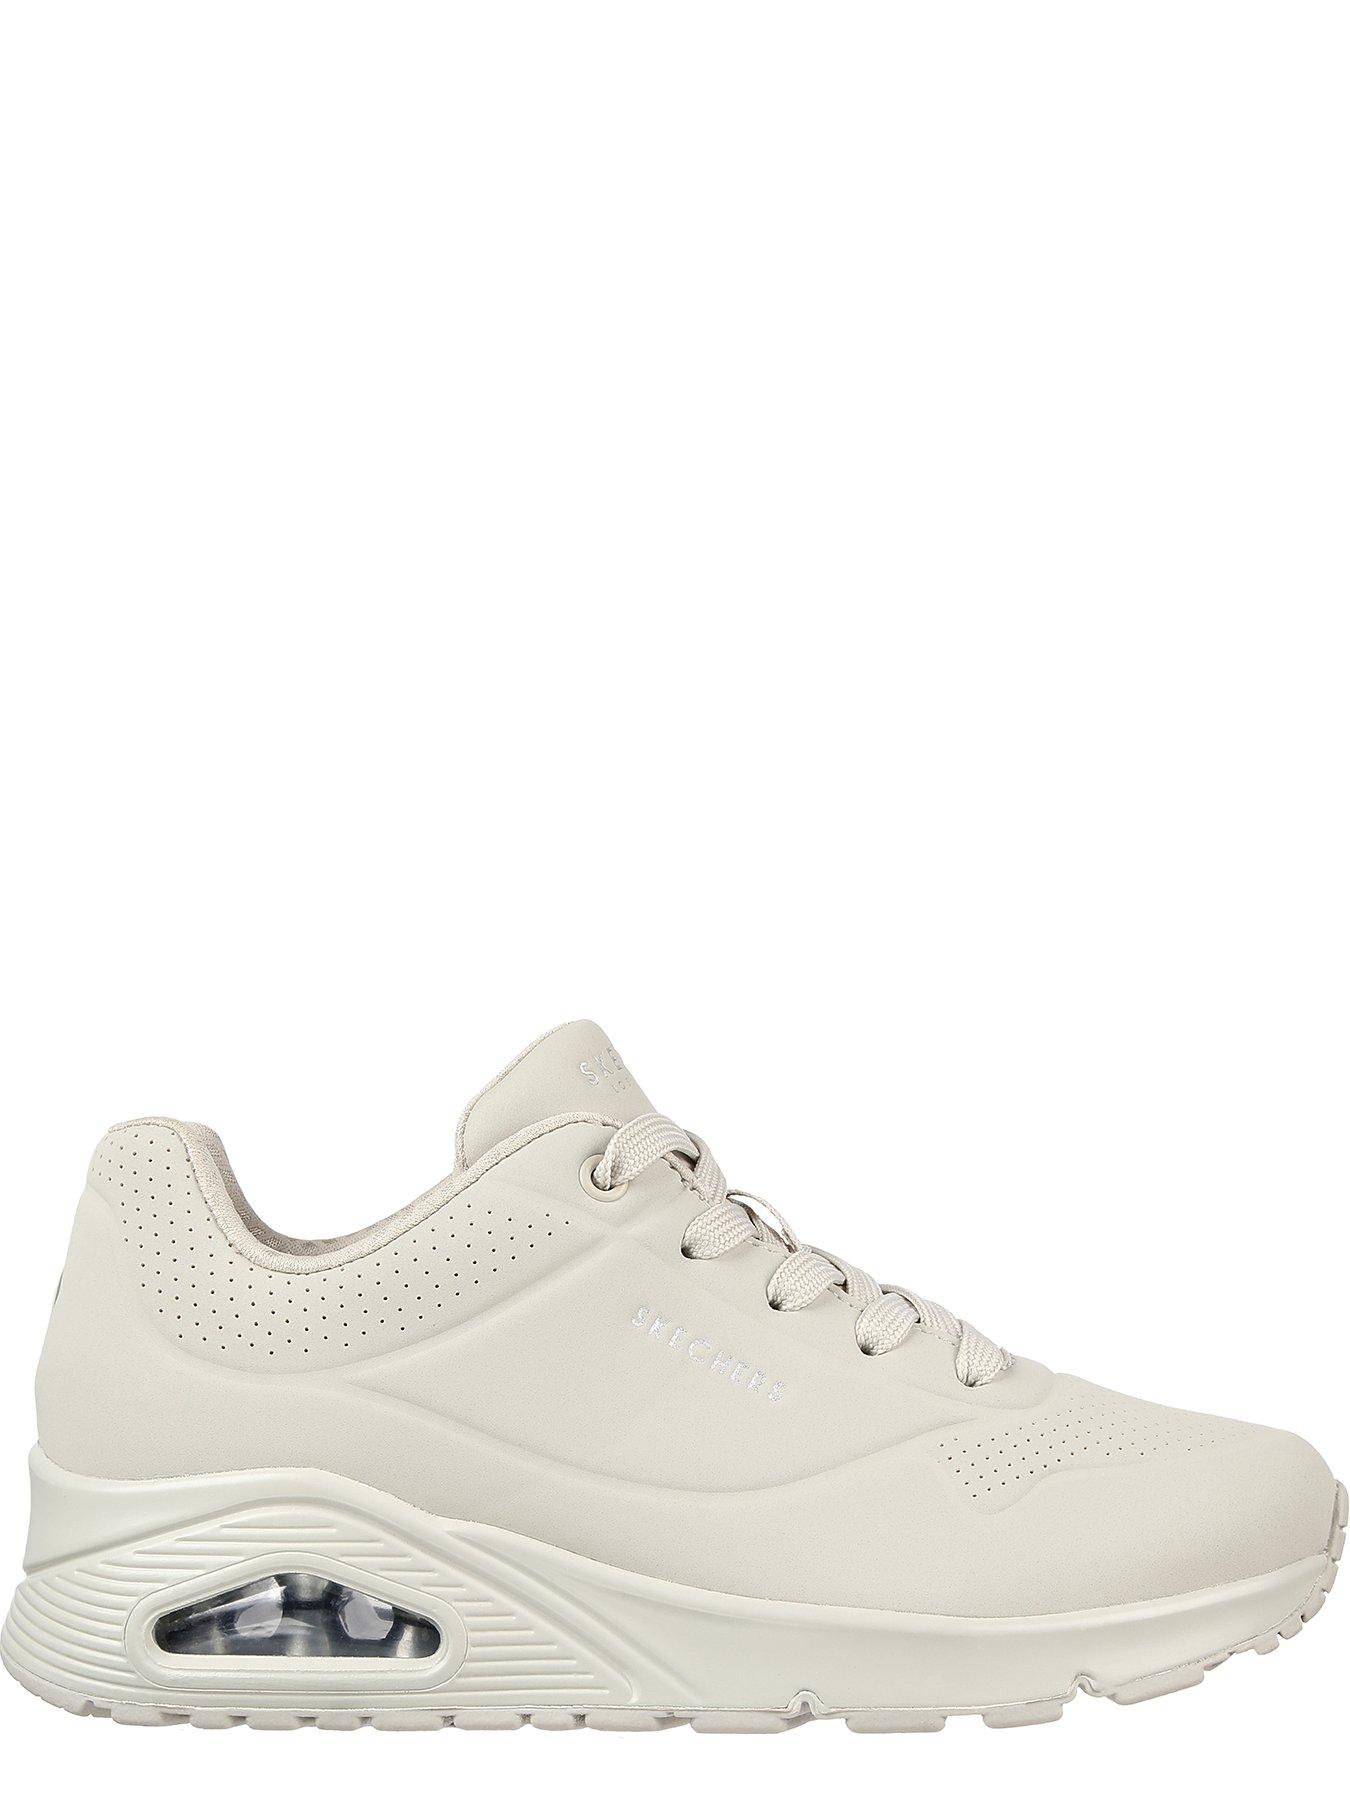 Skechers Uno Stand On Air Trainers - White